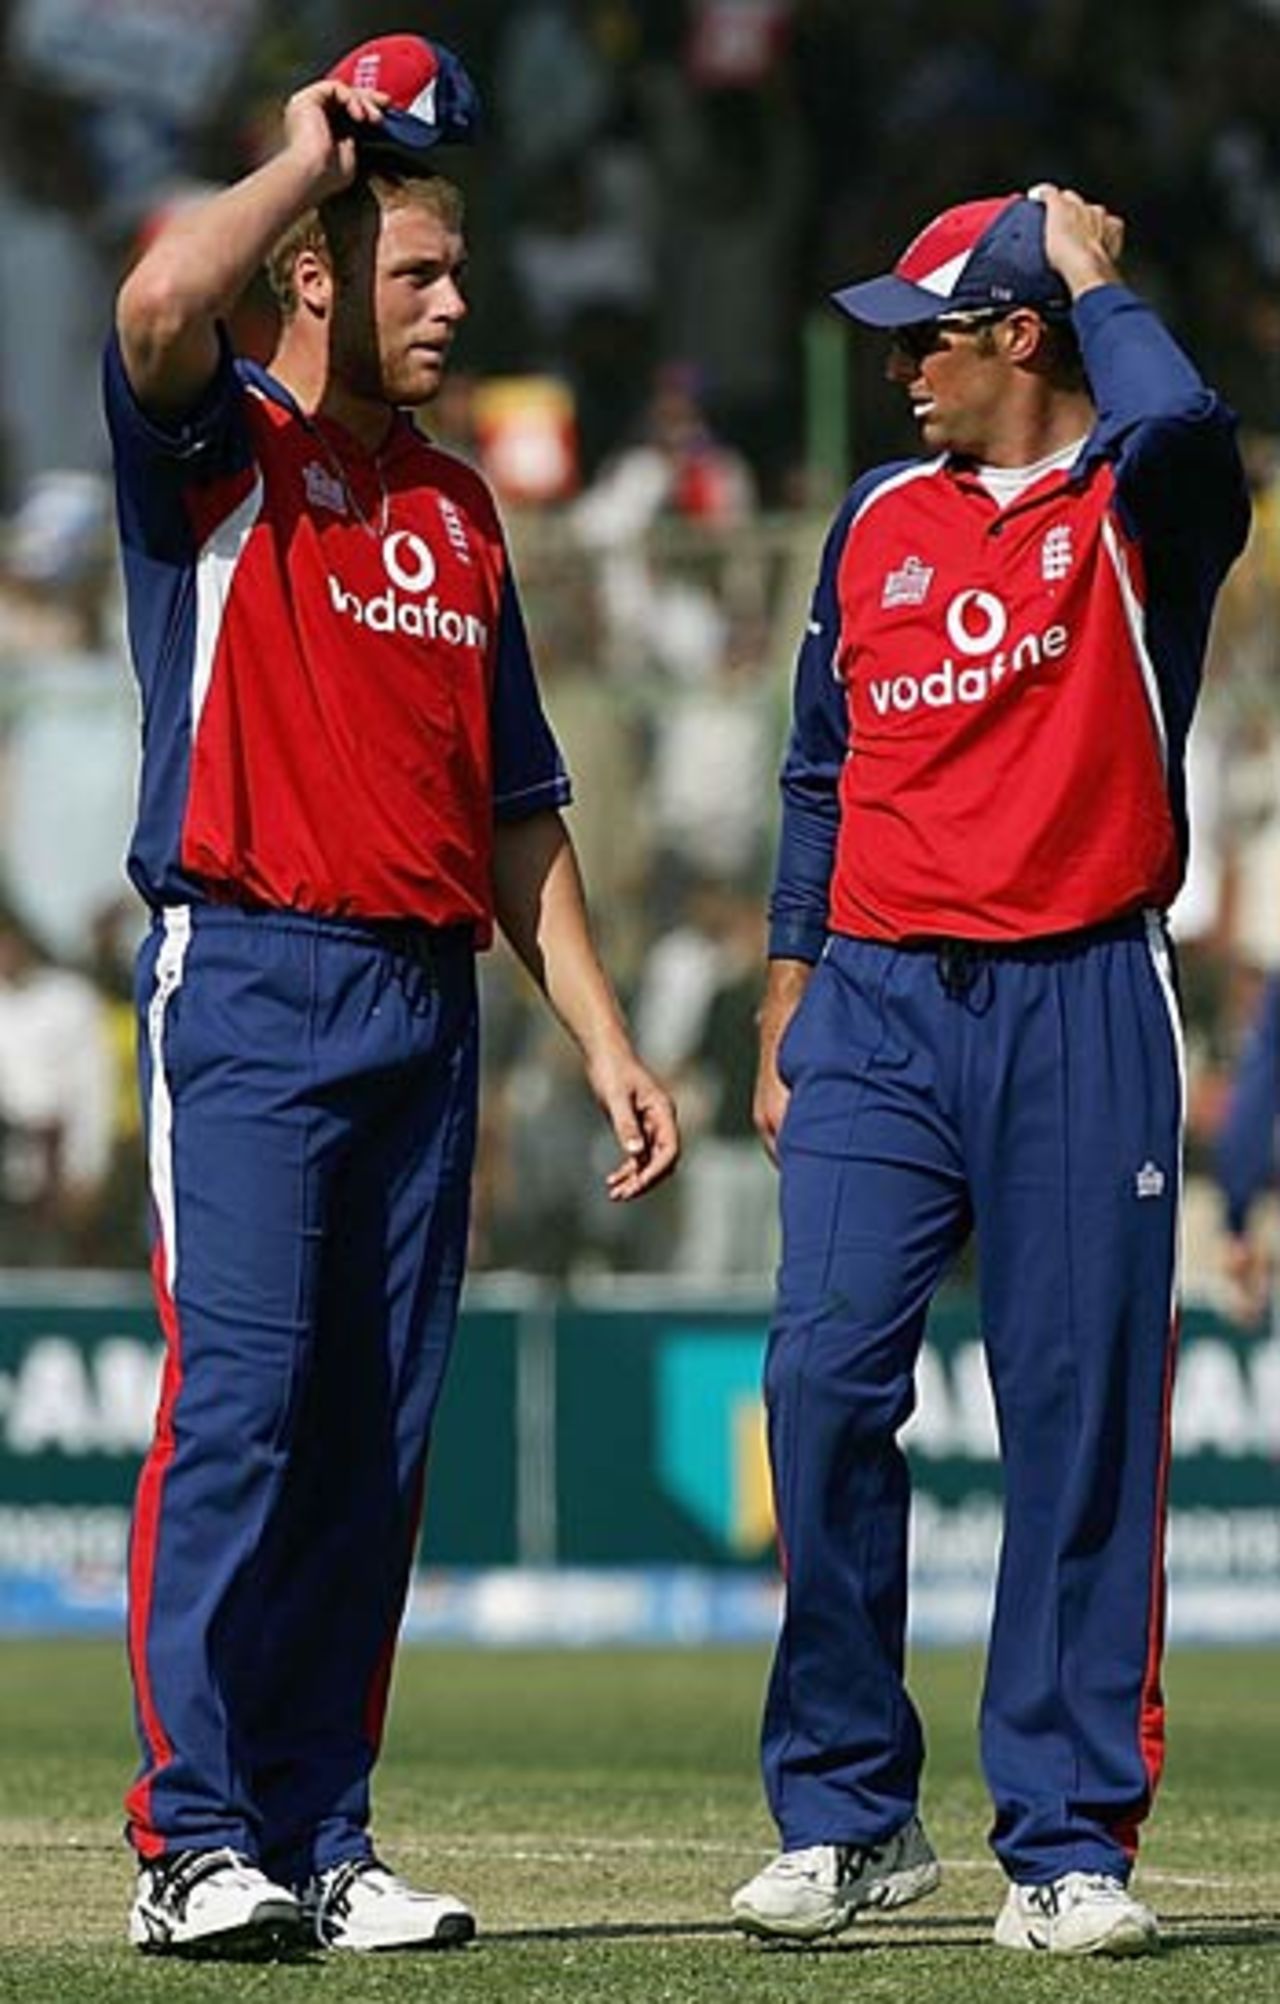 Inspiration needed: Andrew Flintoff and Marcus Trescothick search for a way to stem the flow of runs, Pakistan v England, 3rd ODI, Pakistan, December 15, 2005